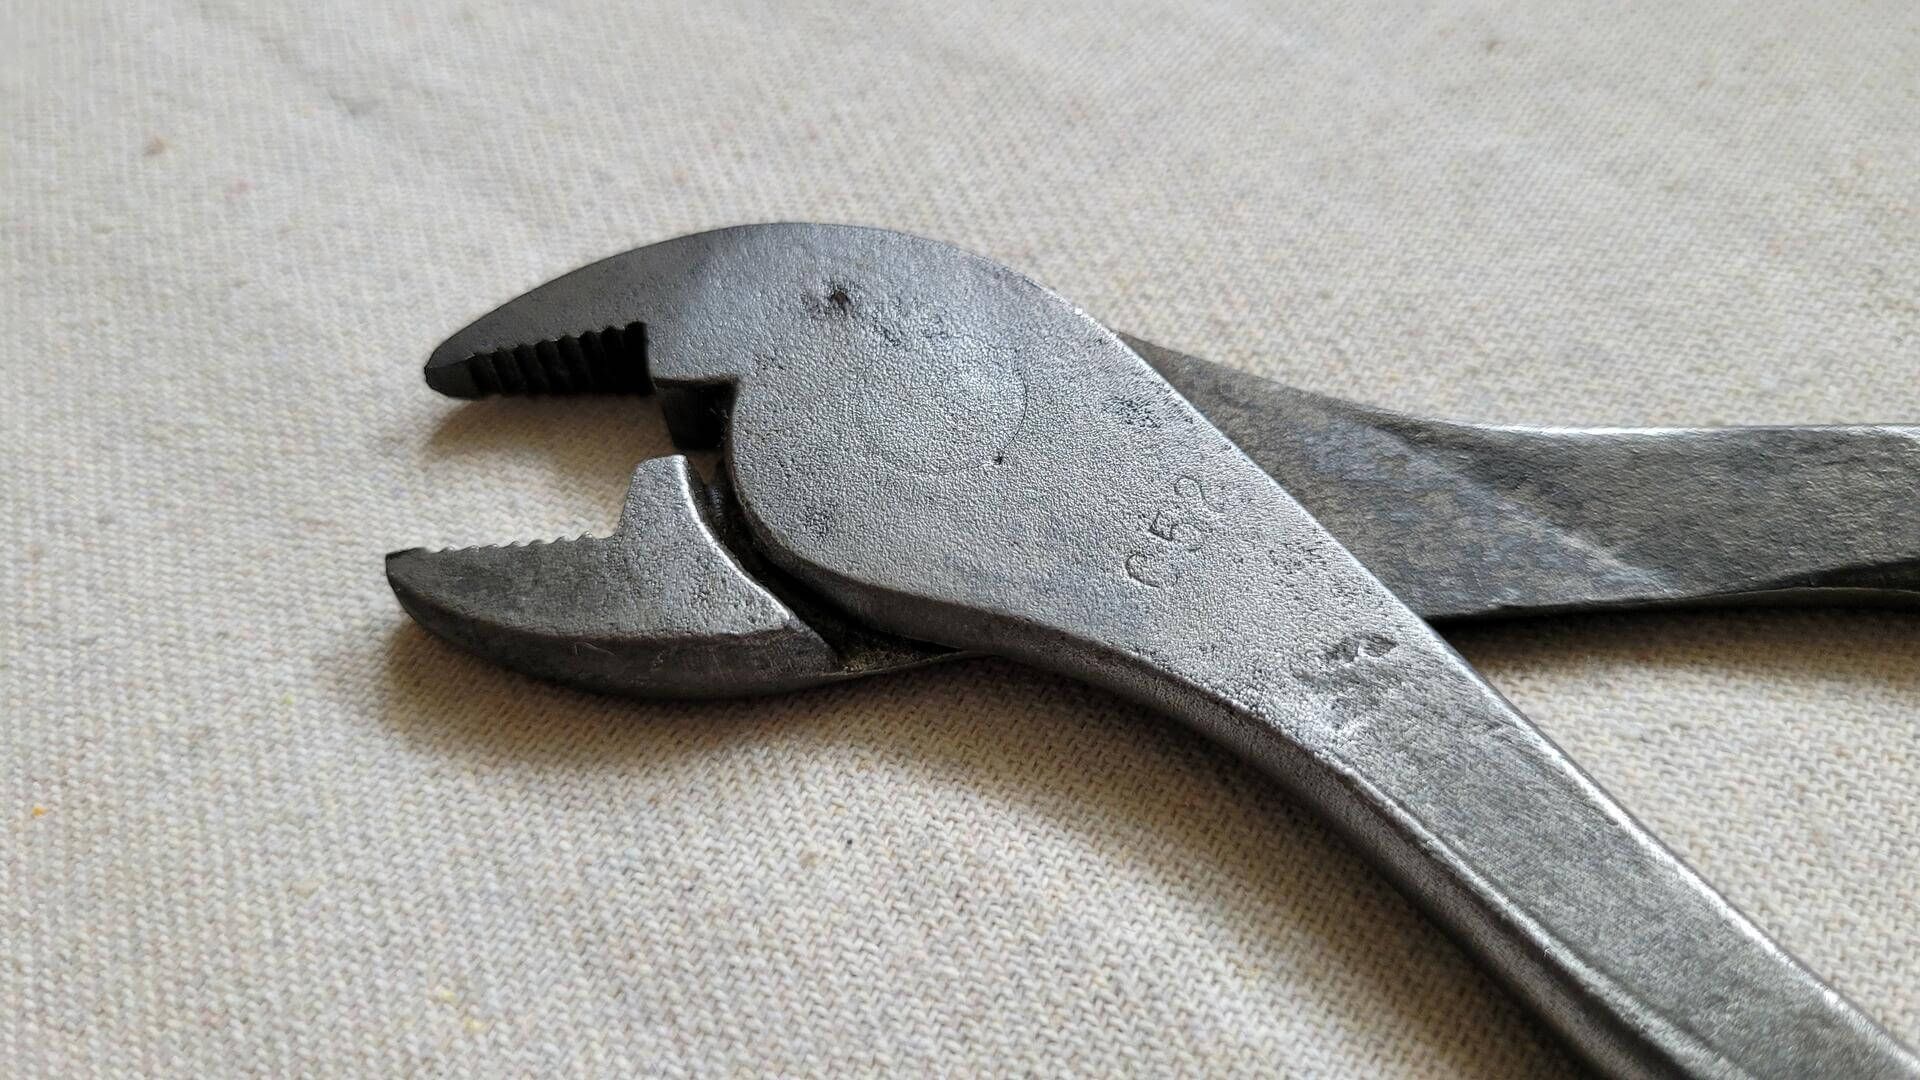 Rare antique forged battery terminal pliers 8 inches - Vintage made in Canada mechanic and automotive collectible hand tools